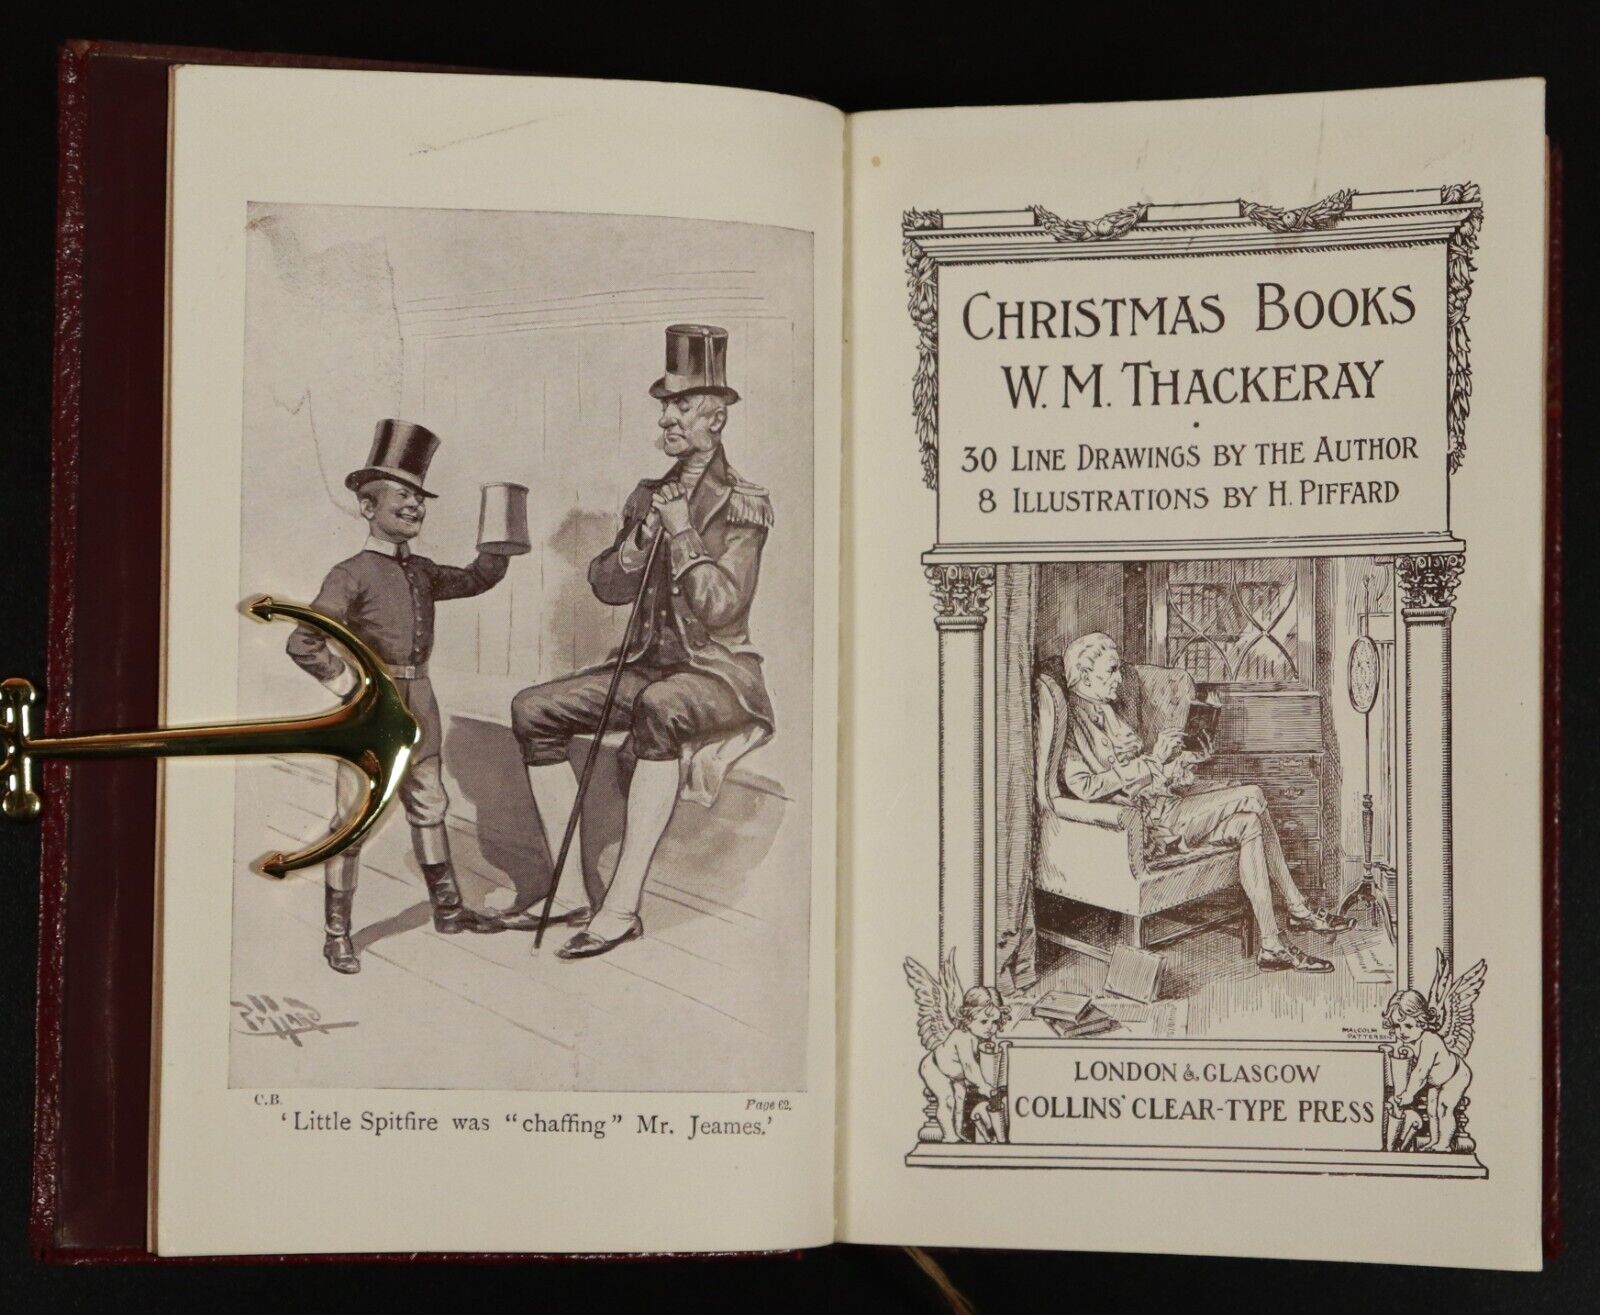 c1910 2vol Christmas Books & Round About Papers by W.M. Thackeray Antique Books